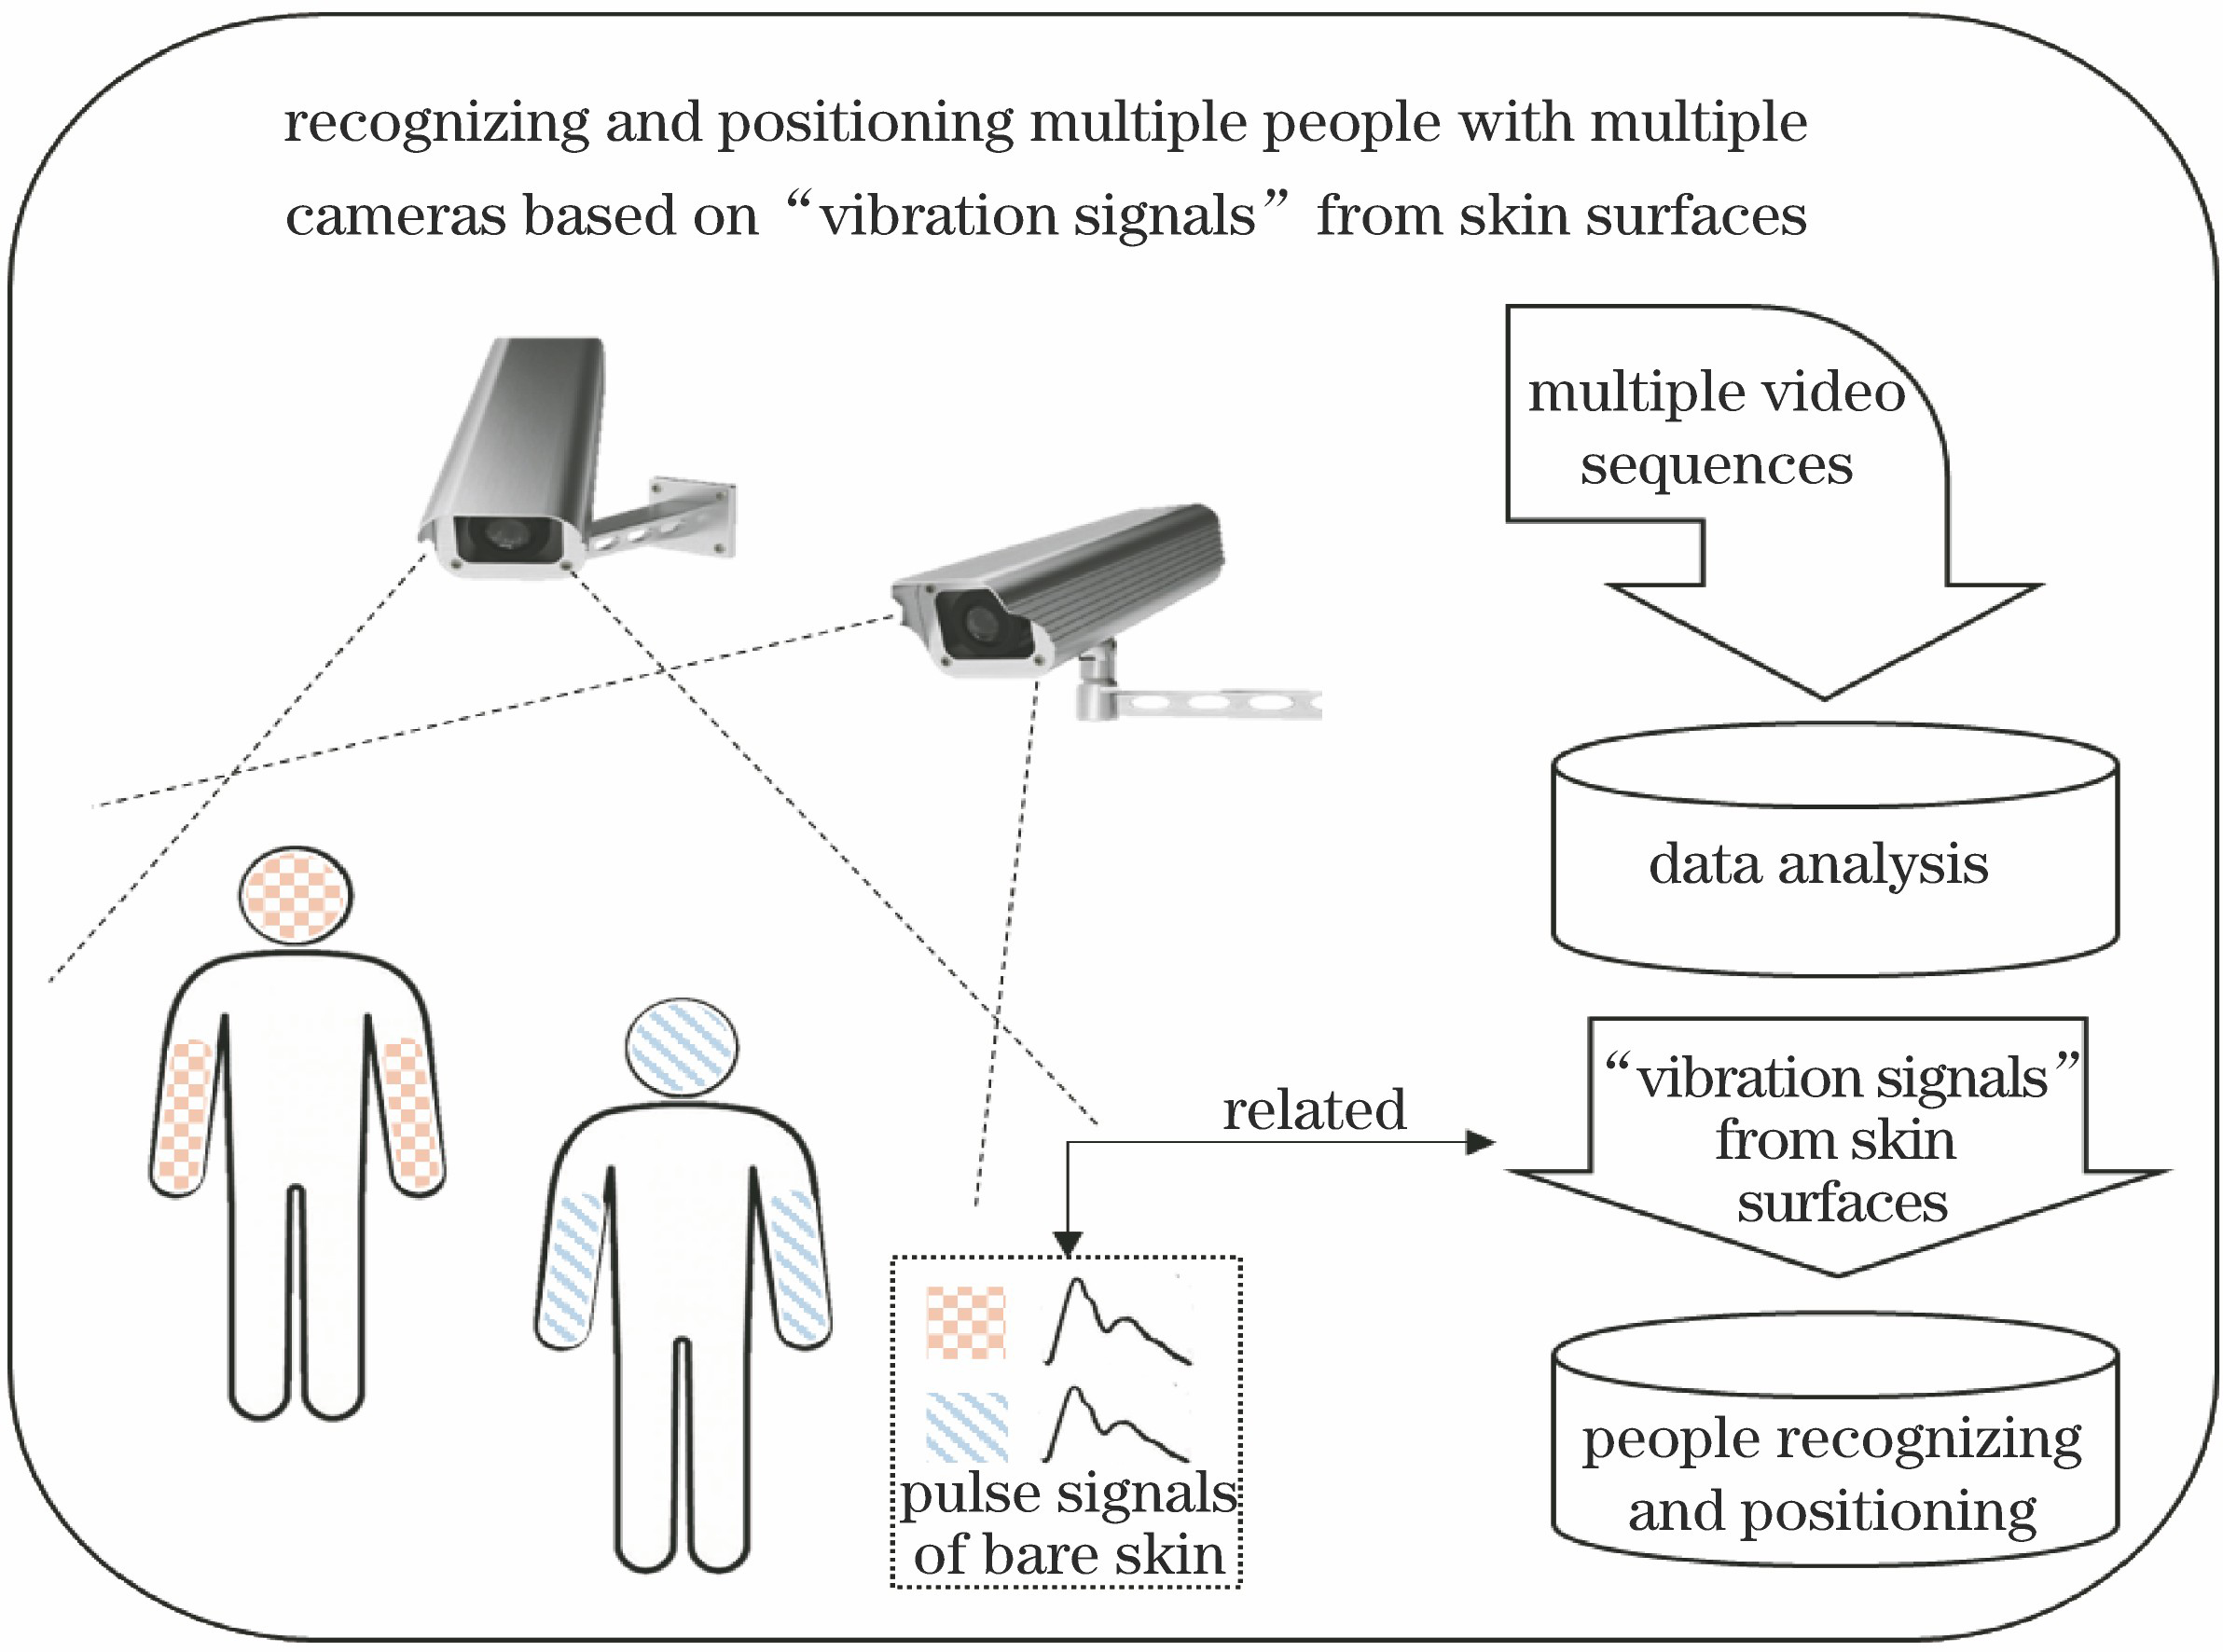 Illustration of multiple people recognition and positioning with multiple cameras based on “vibration signals” from skin surfaces